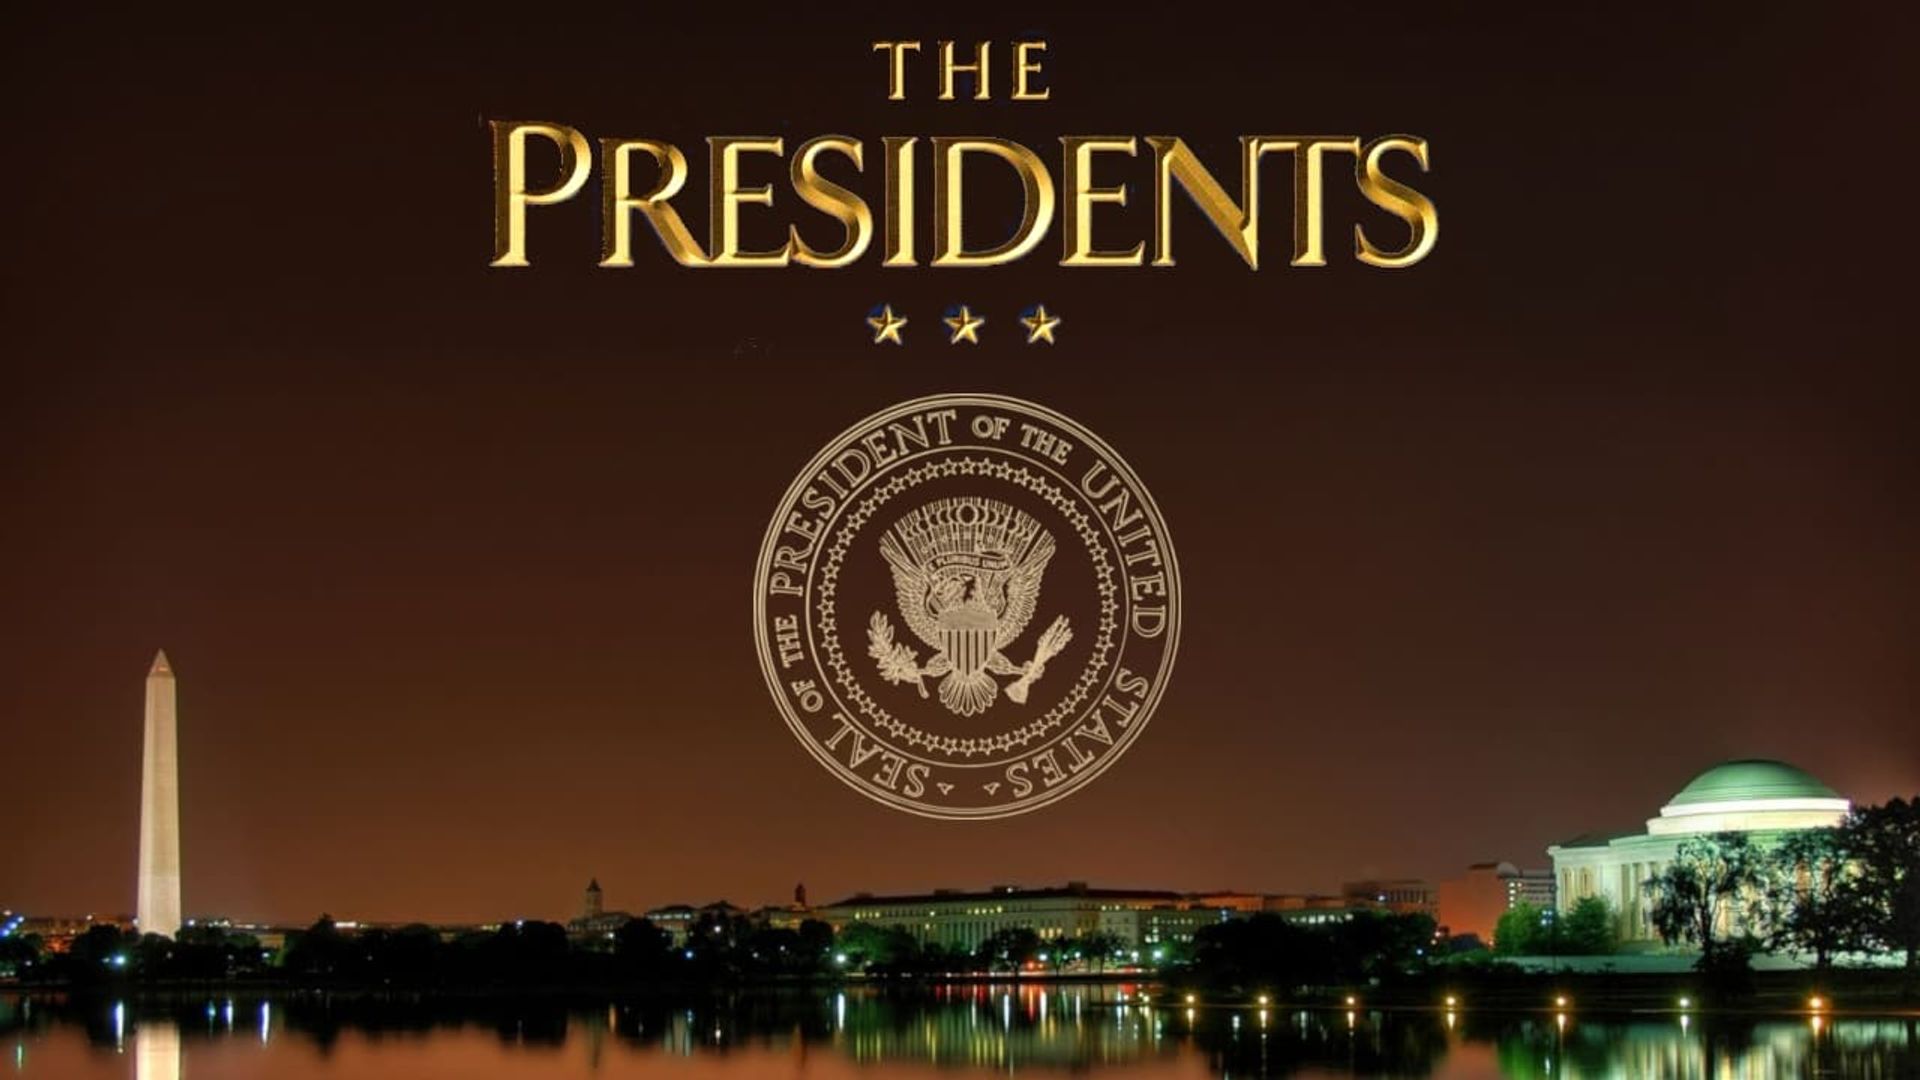 The Presidents background